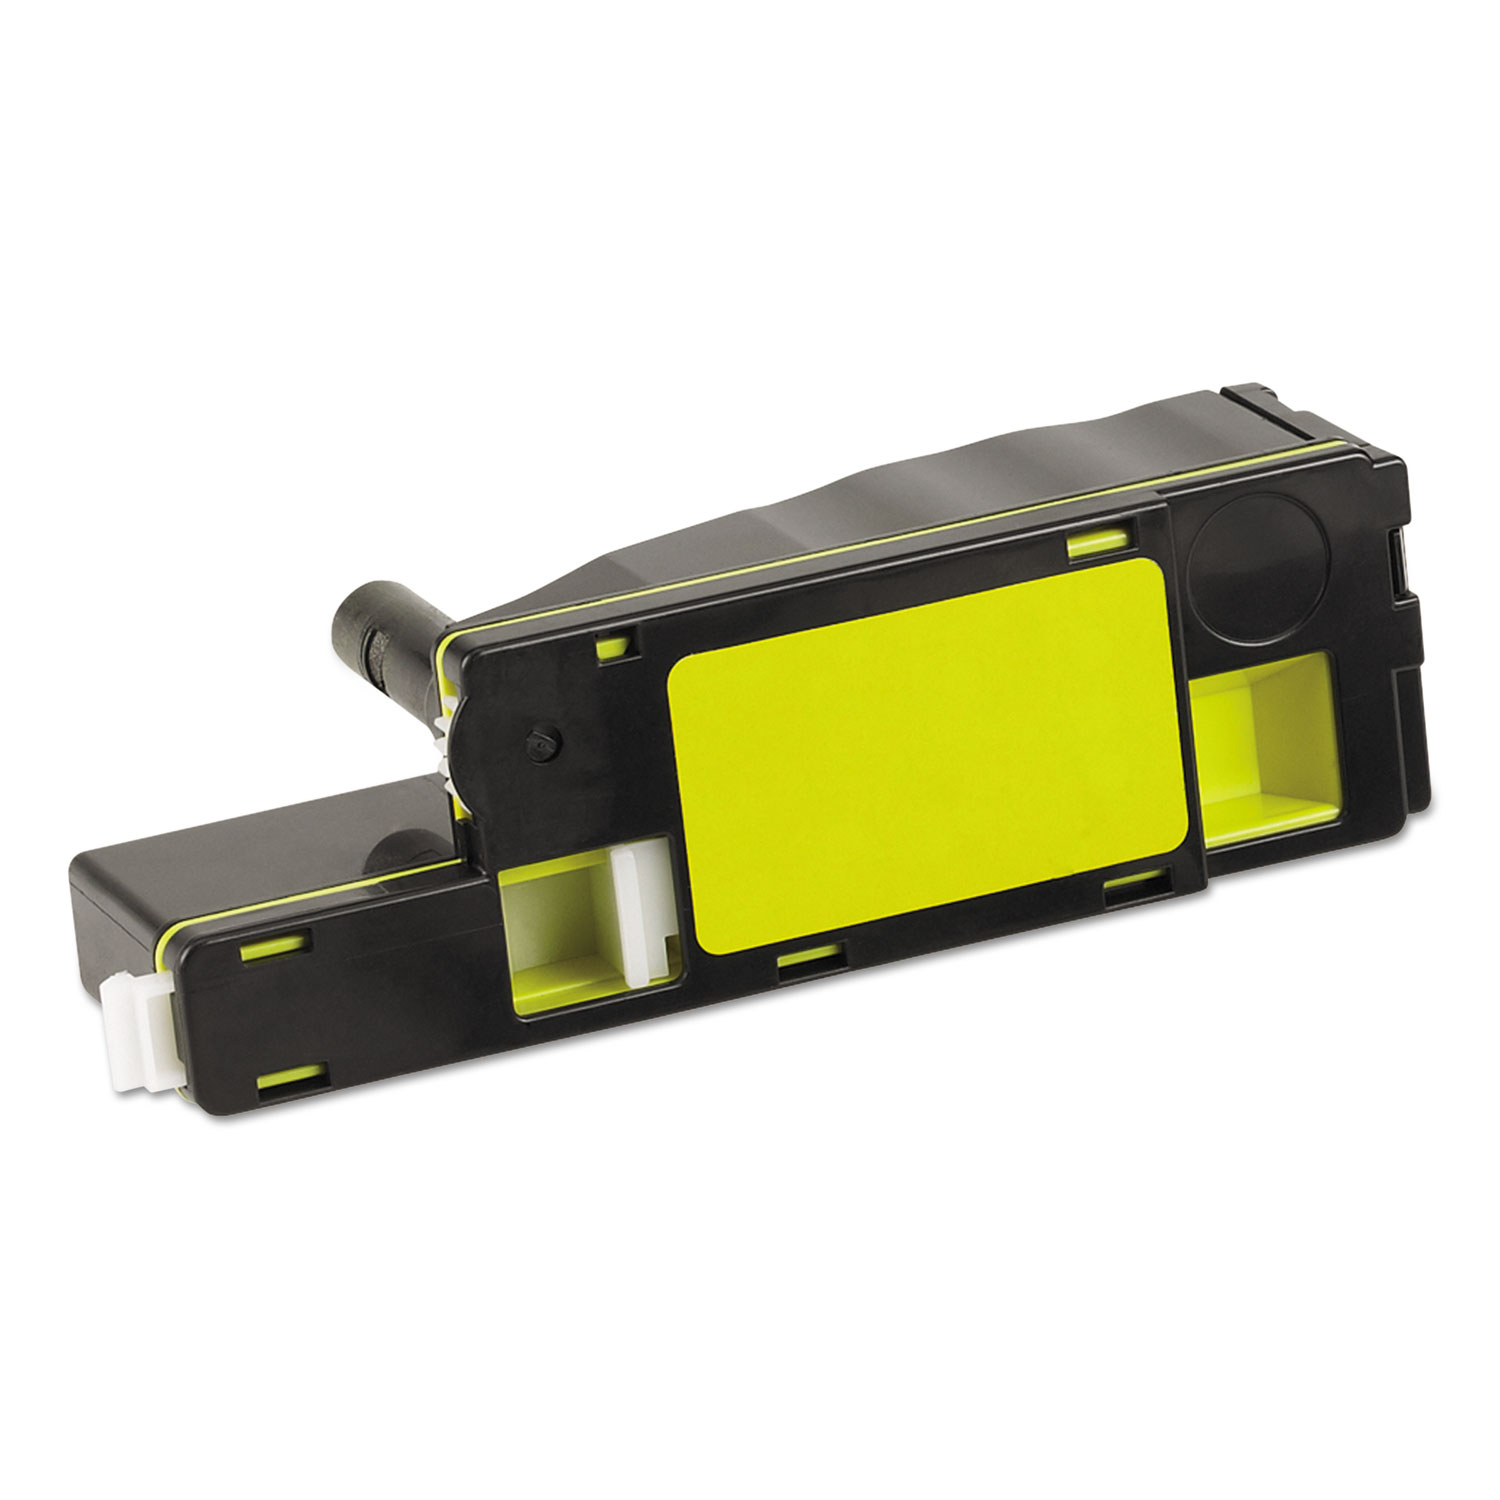  Media Sciences 41088 41088 Remanufactured 331-0779 (5M1VR) High-Yield Toner, 1400 Page-Yield, Yellow (MDA41088) 